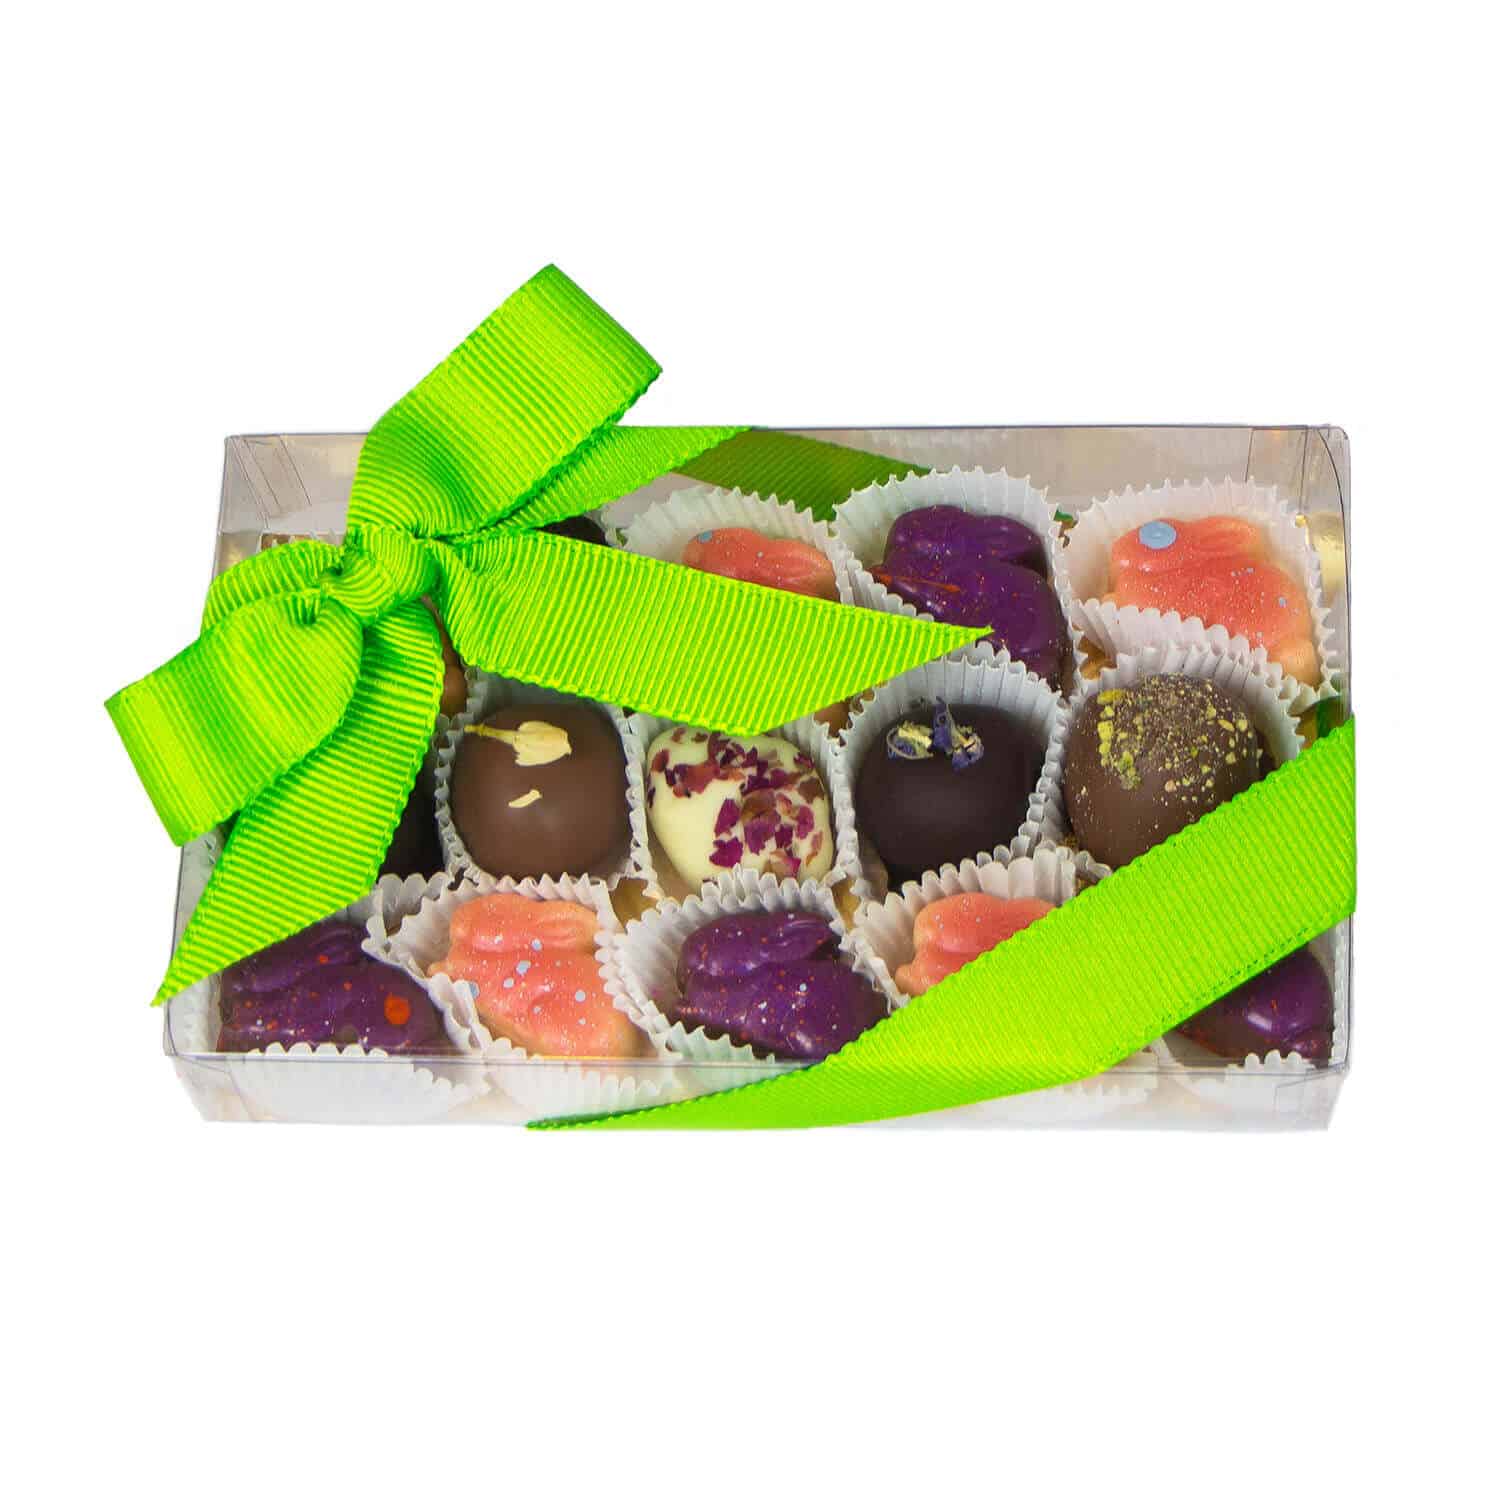 floral truffles and bunnies